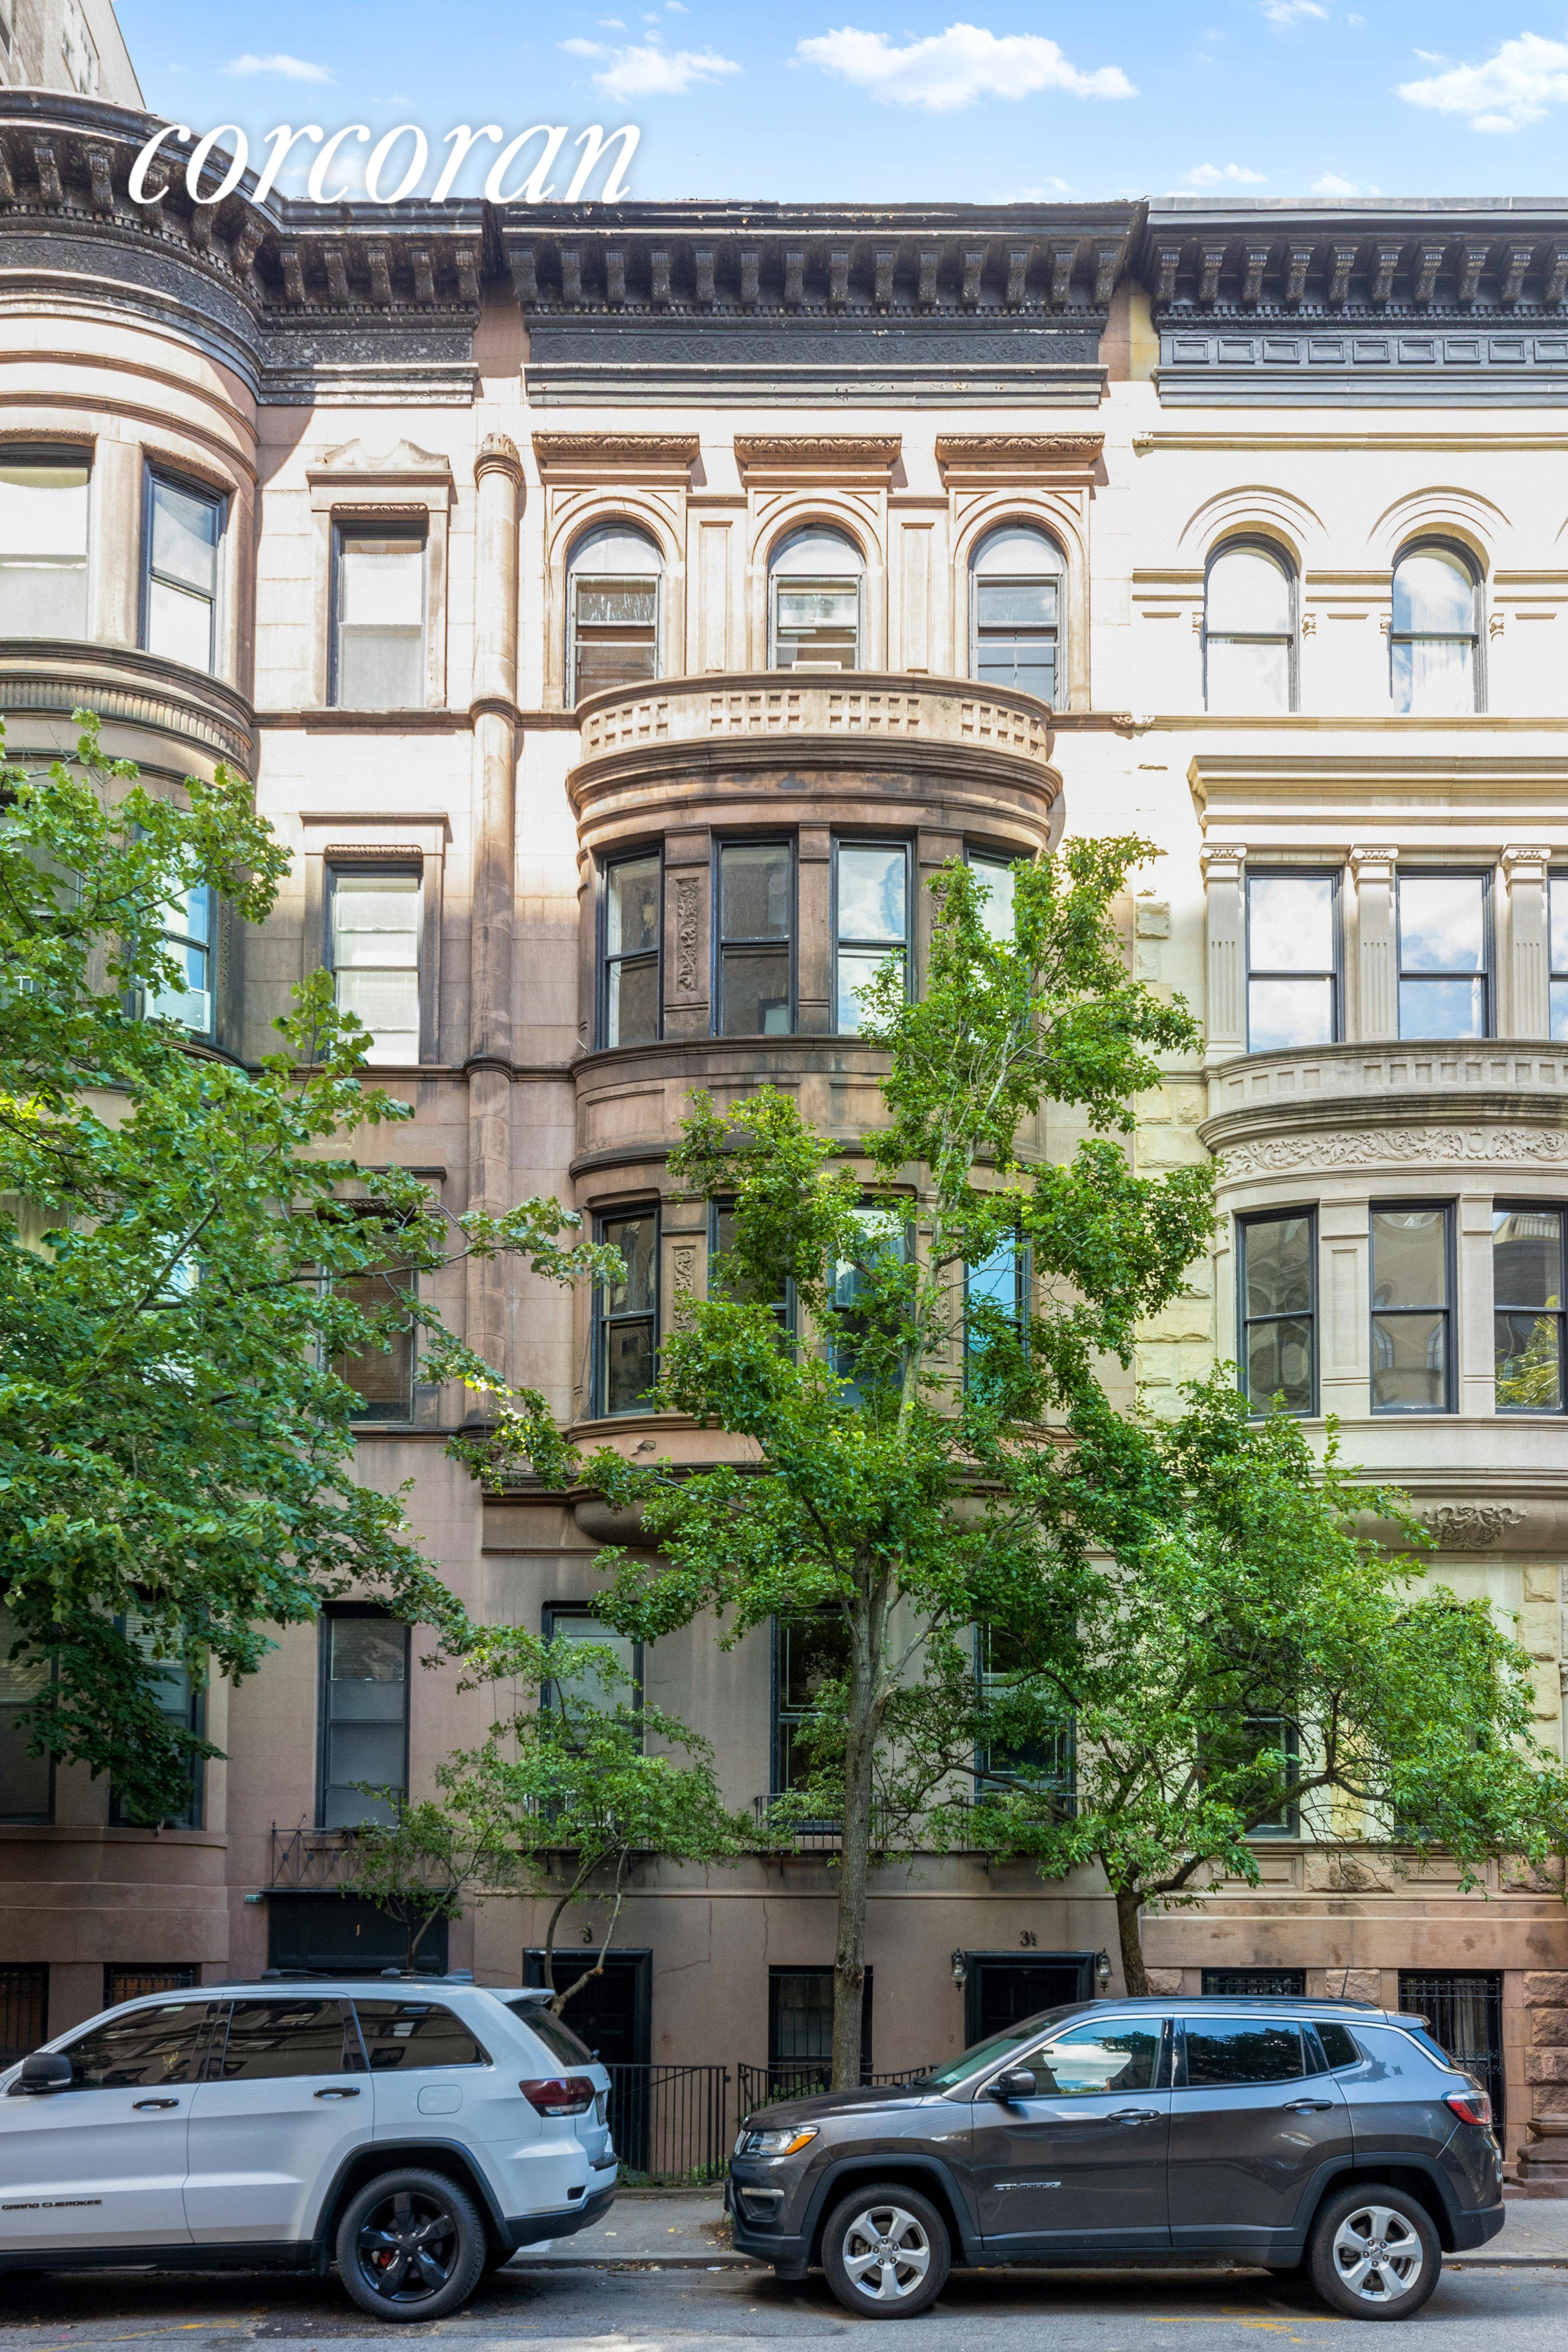 An historic opportunity to own 3 East 93rd Street, a rare Carnegie Hill 22 foot wide landmarked townhouse just off of Fifth Avenue with endless possibilities.